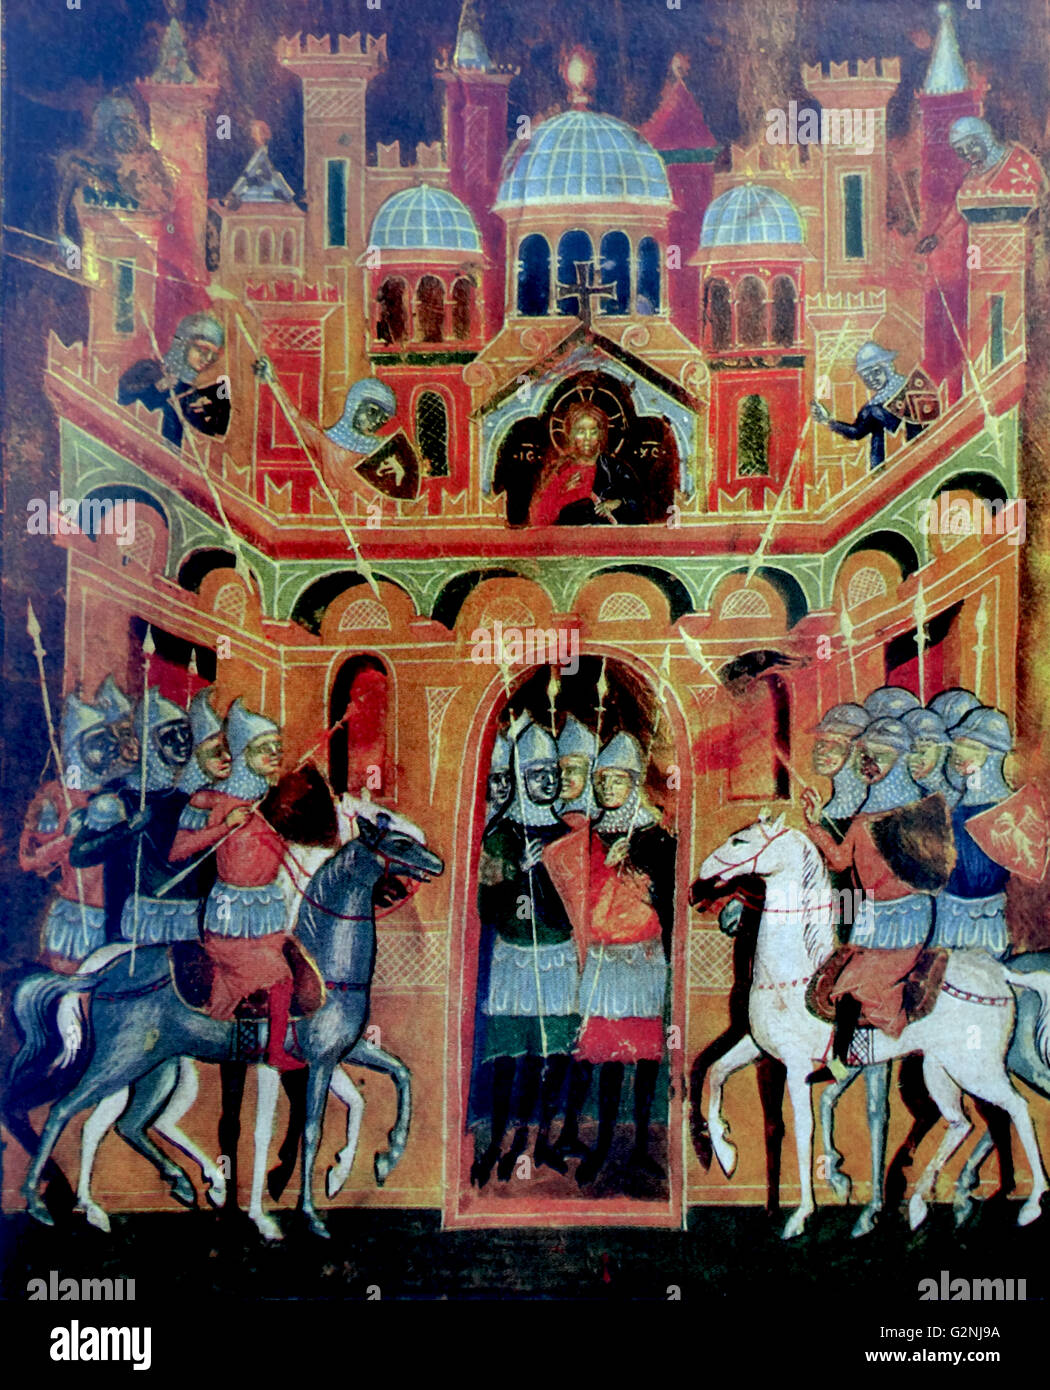 Venetian Miniature depicting the Holy War on Jerusalem. Also known as, the Siege of Jerusalem, took place in July 1099 resulting in victory for the Crusaders and the formation of the Kingdom of Jerusalem. Dated 13th Century Stock Photo